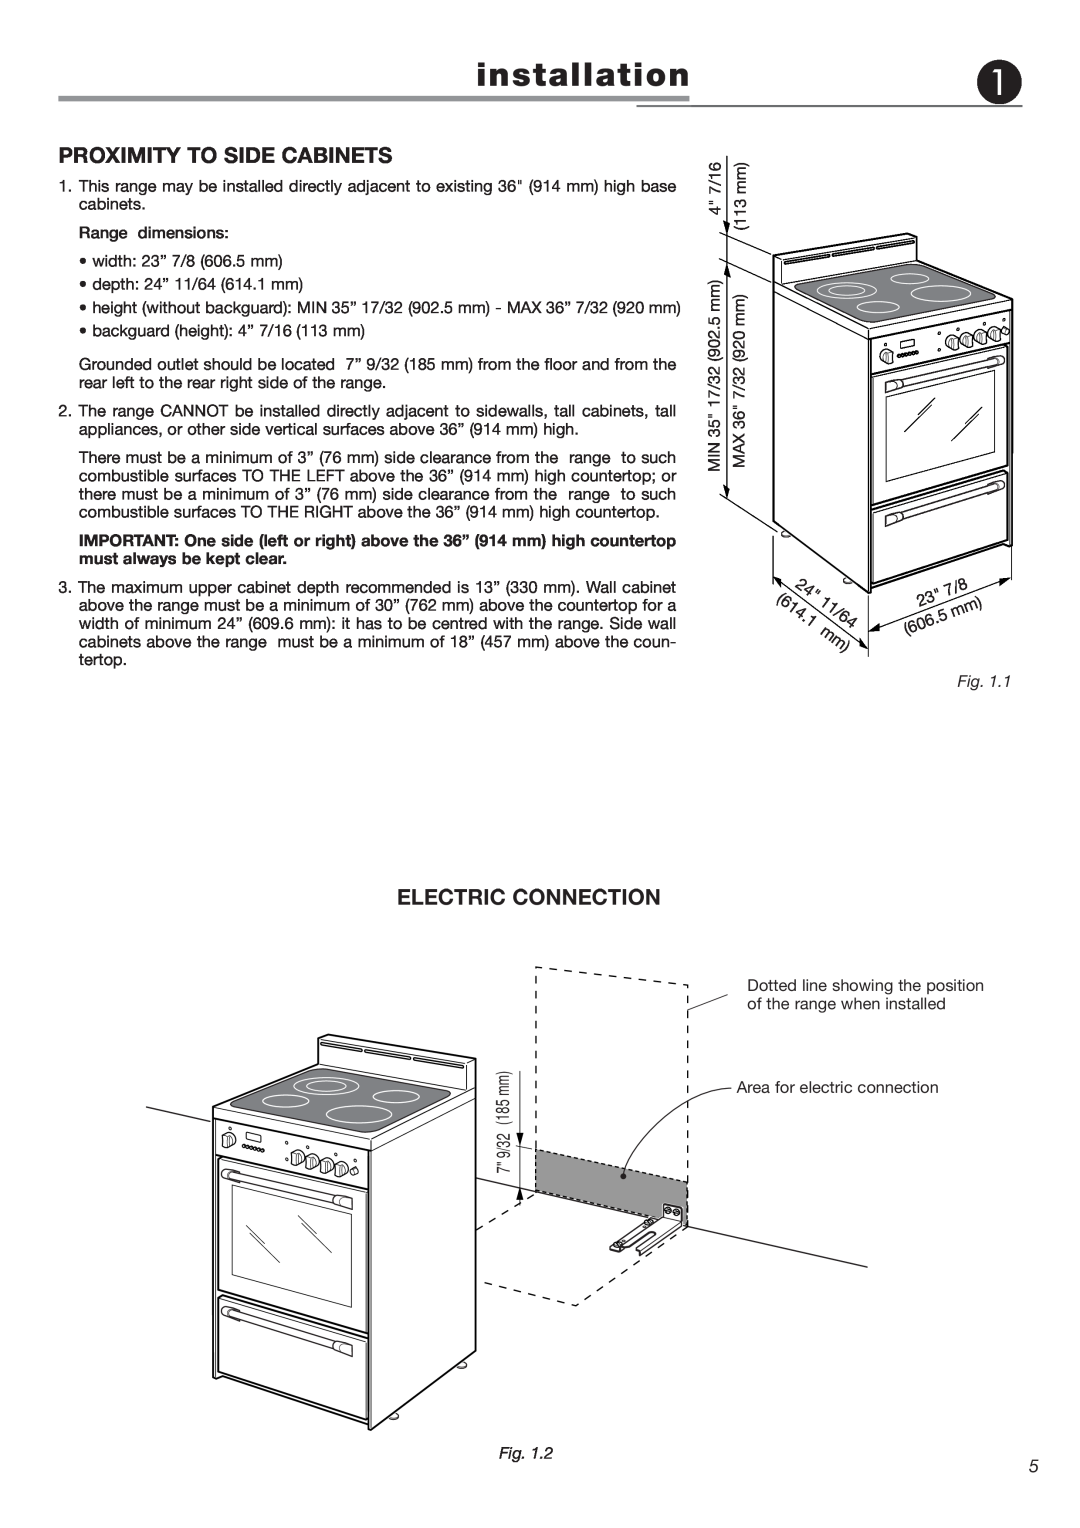 DeLonghi DEGLSC 24 SS warranty installation, Proximity To Side Cabinets, Electric Connection 